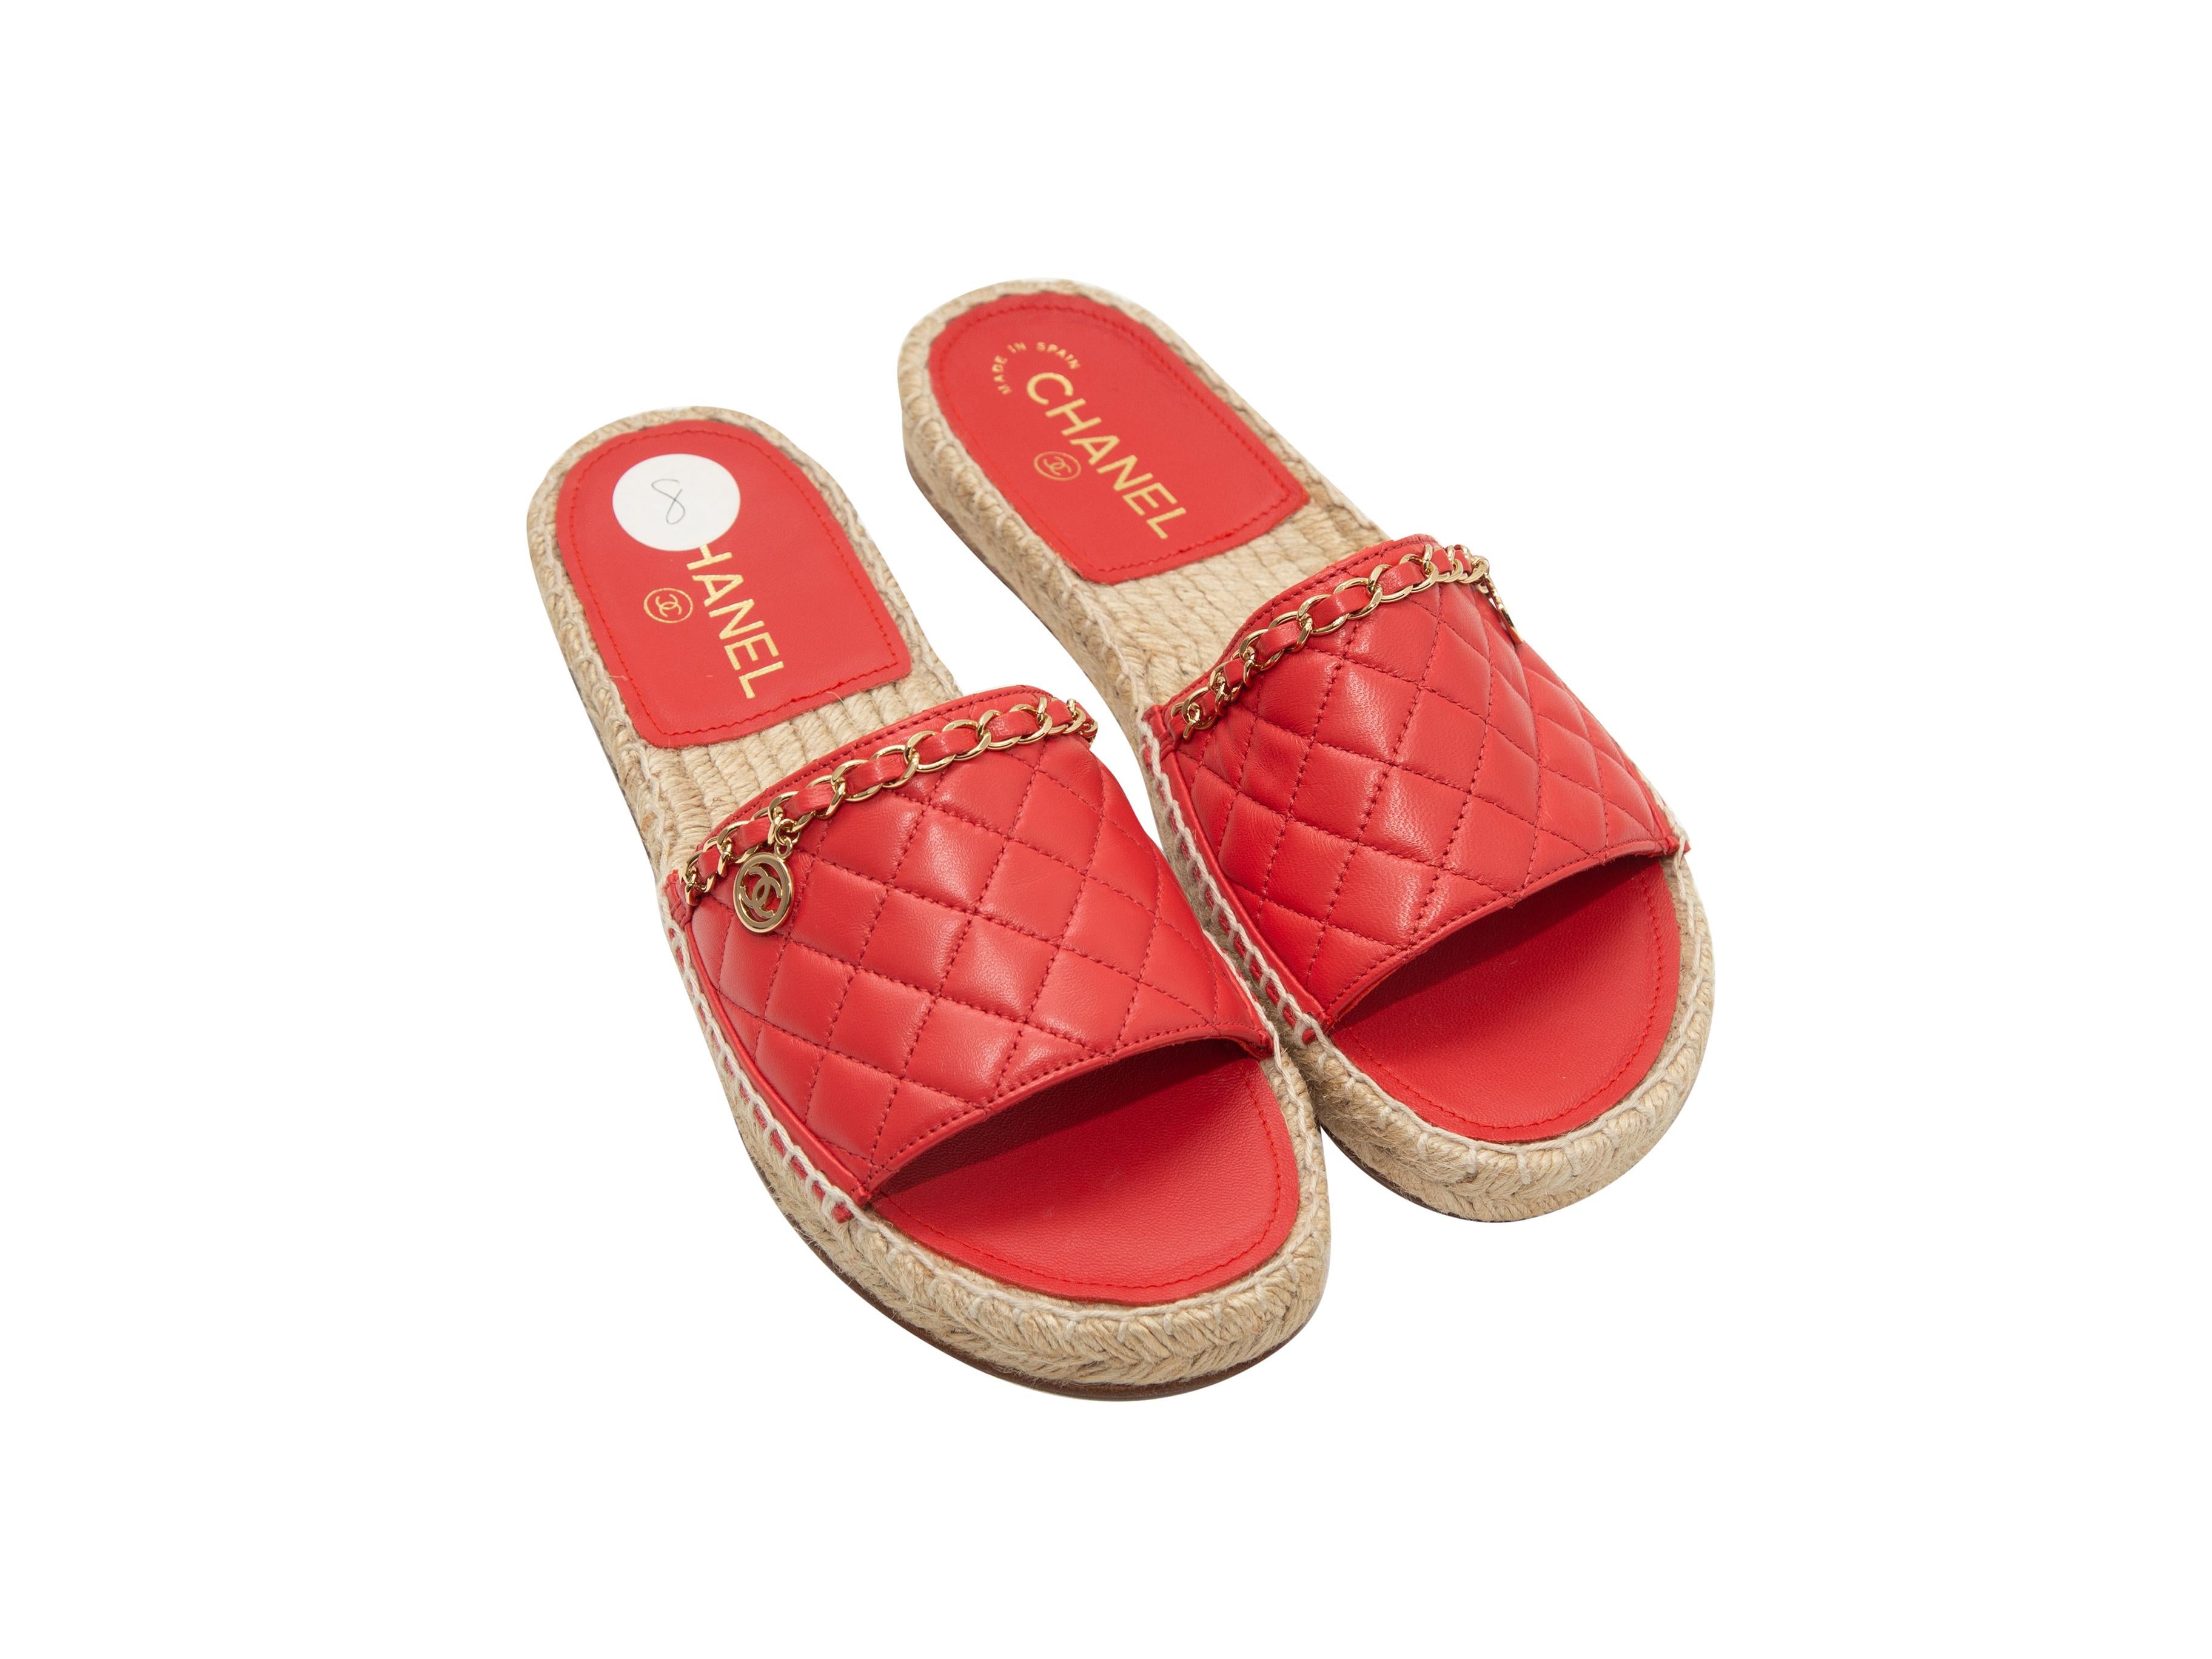 Product details: Coral quilted leather espadrille slide sandals by Chanel. From the 2018 Collection. Gold-tone chain-link trim at tops. Jute trim at rubber soles. Designer size 38. 1